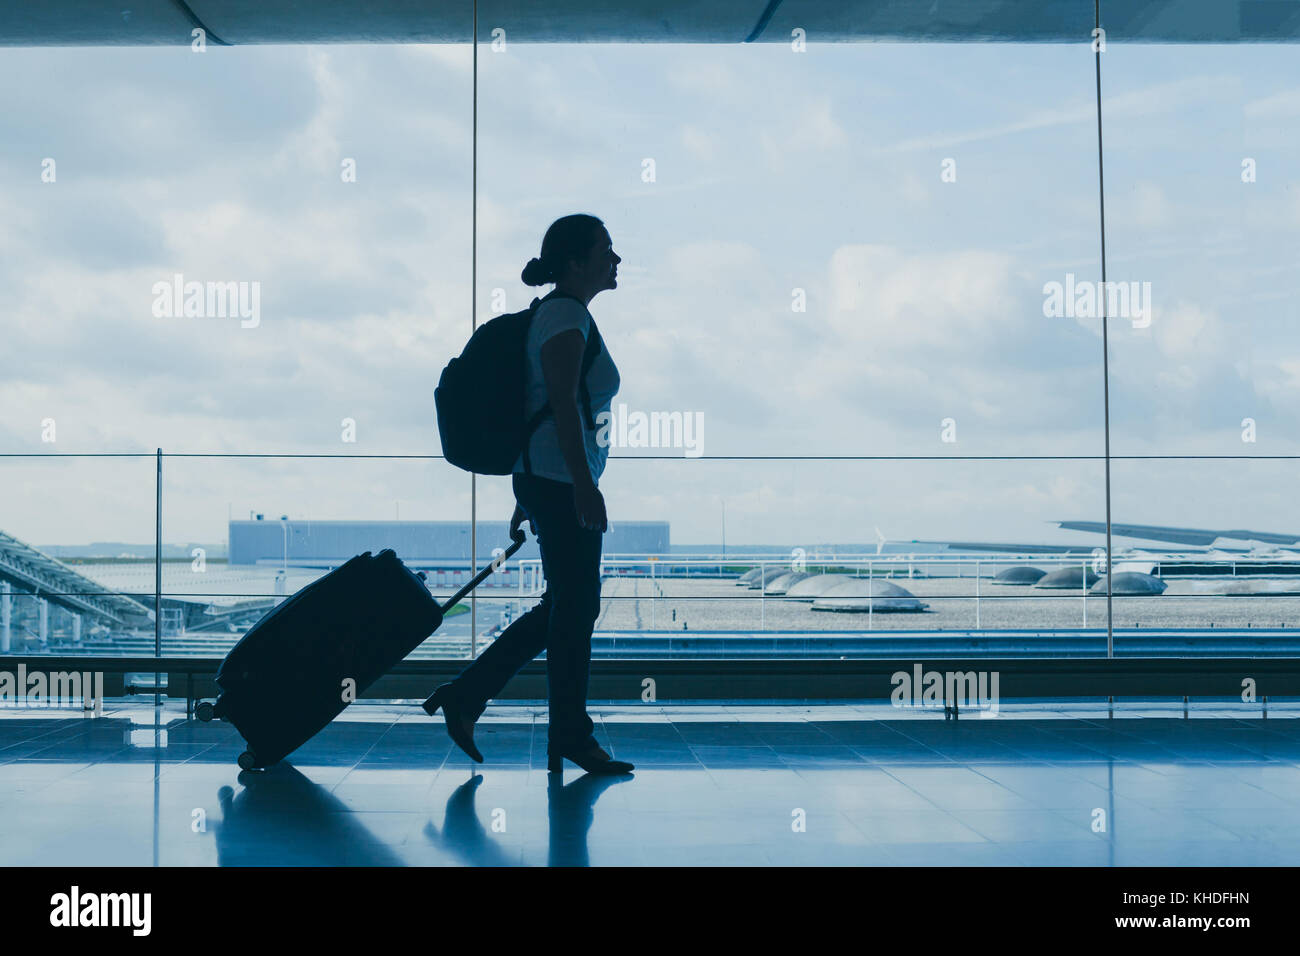 departures in airport, silhouette of woman walking with suitcase, travel background with copy space Stock Photo